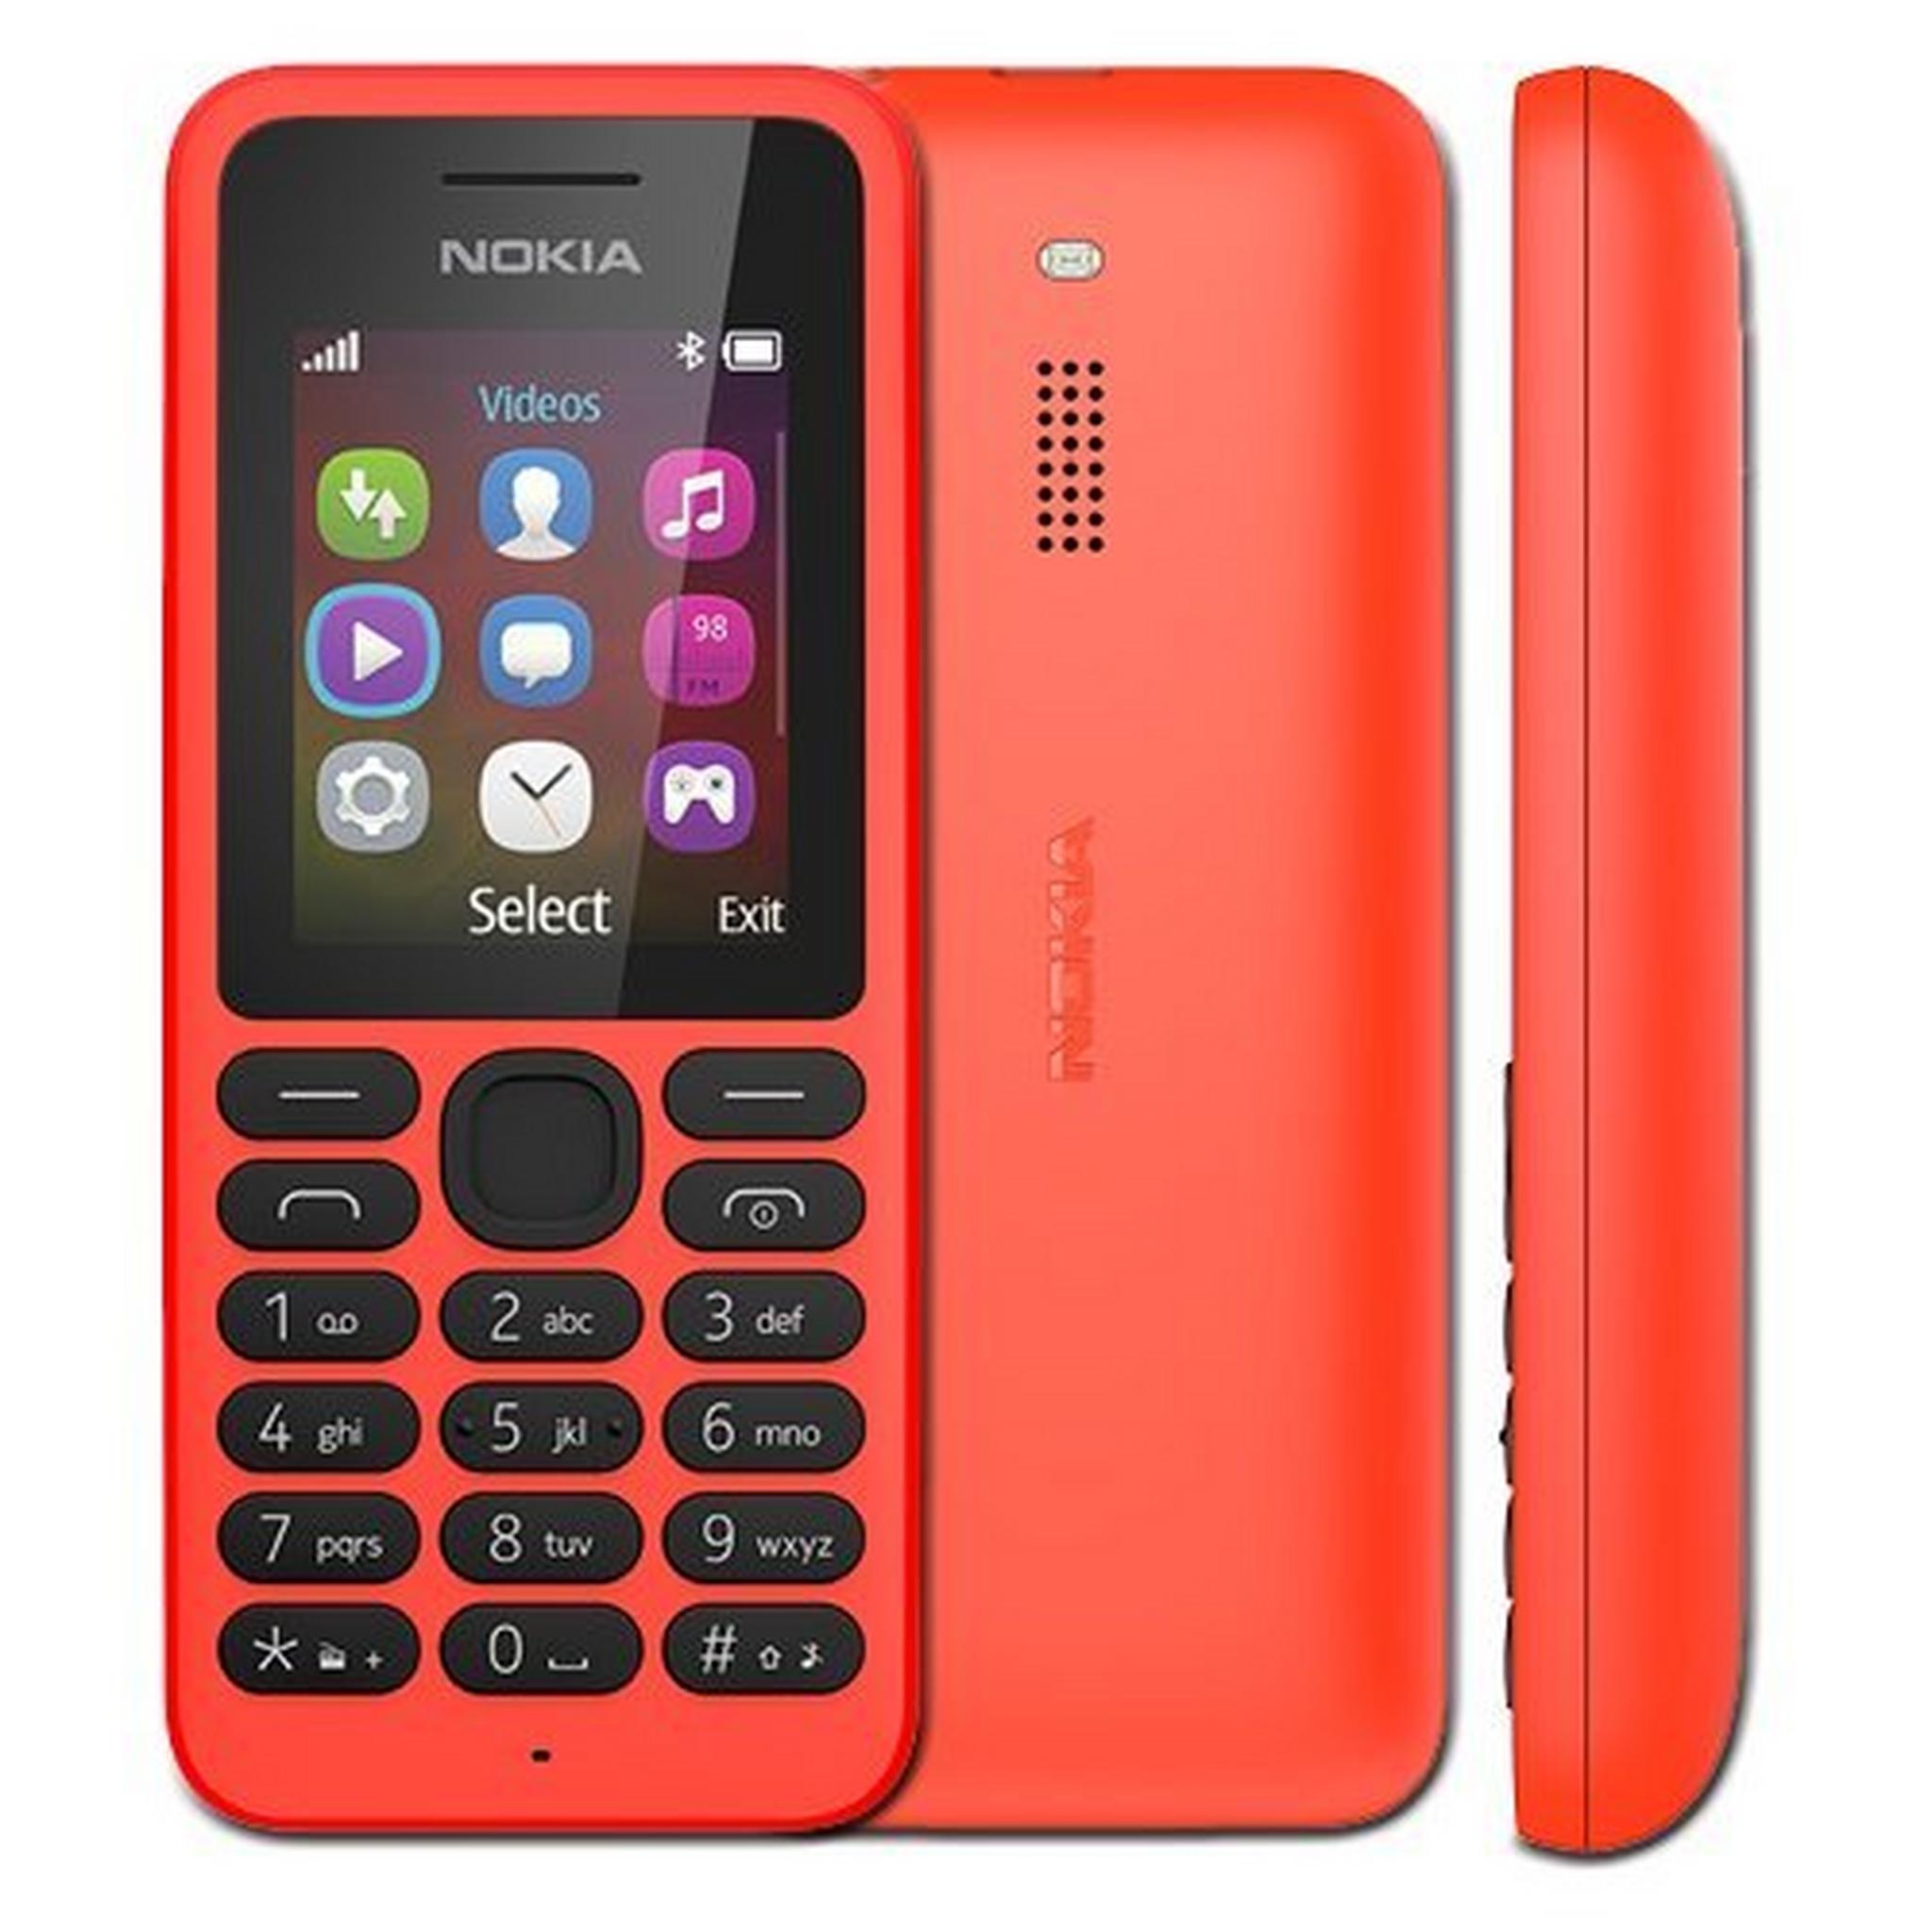 Nokia 130 Dual SIM Feature Phone 1.8-inch - Red